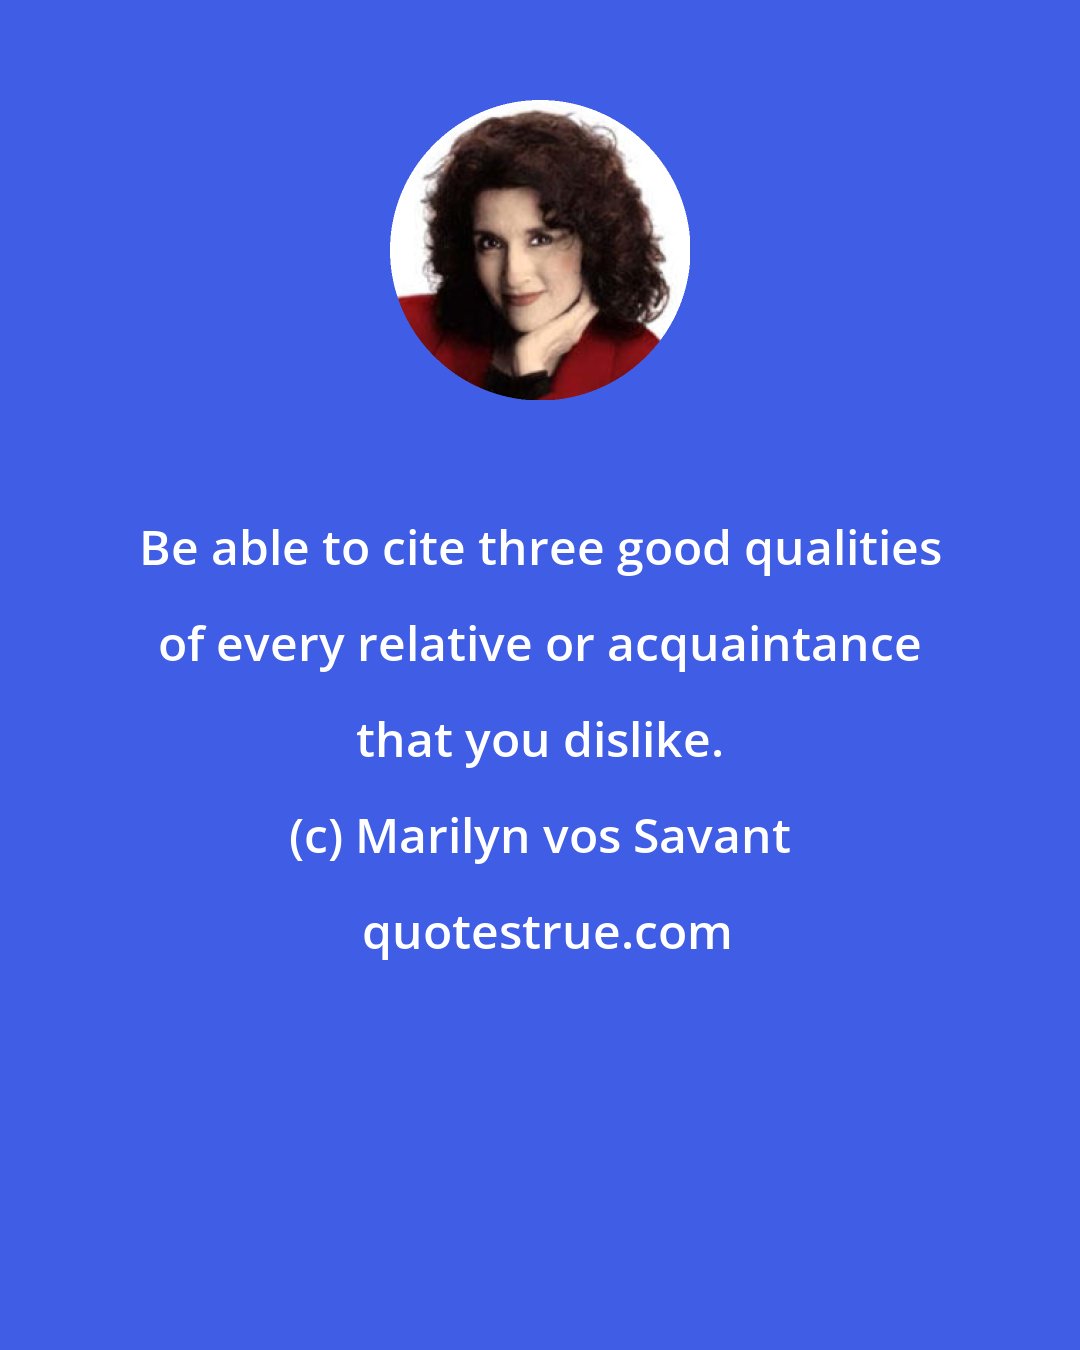 Marilyn vos Savant: Be able to cite three good qualities of every relative or acquaintance that you dislike.